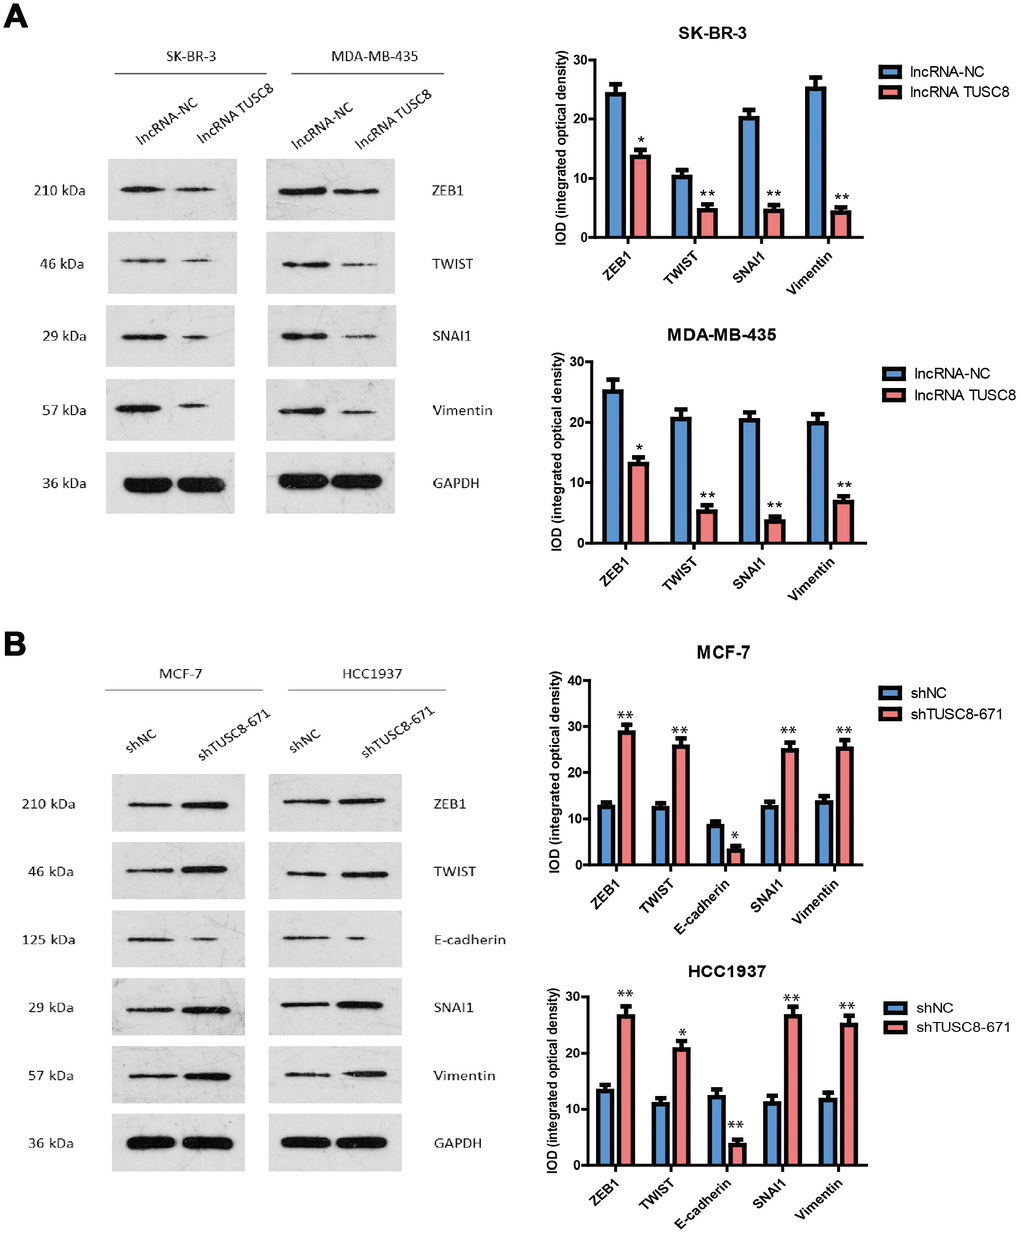 TUSC8 affects breast cancer cell metastasis through regulating the expression of epithelial–mesenchymal transition (EMT) related markers. (A) Over-expression of TUSC8 down-regulated the expression of mesenchymal related markers (ZEB1, TWIST, SNAI1 and Vimentin) in breast cancer cell lines SK-BR-3 and MDA-MB-435 by western blot. (B) Knock-down of TUSC8 up-regulated the expression of mesenchymal related markers (ZEB1, TWIST, SNAI1 and Vimentin), while down-regulated the expression of epithelial related marker (E-cadherin) in breast cancer cell lines MCF-7 and HCC1937 by western blot. The asterisks (*, **) indicate a significant difference (p p 